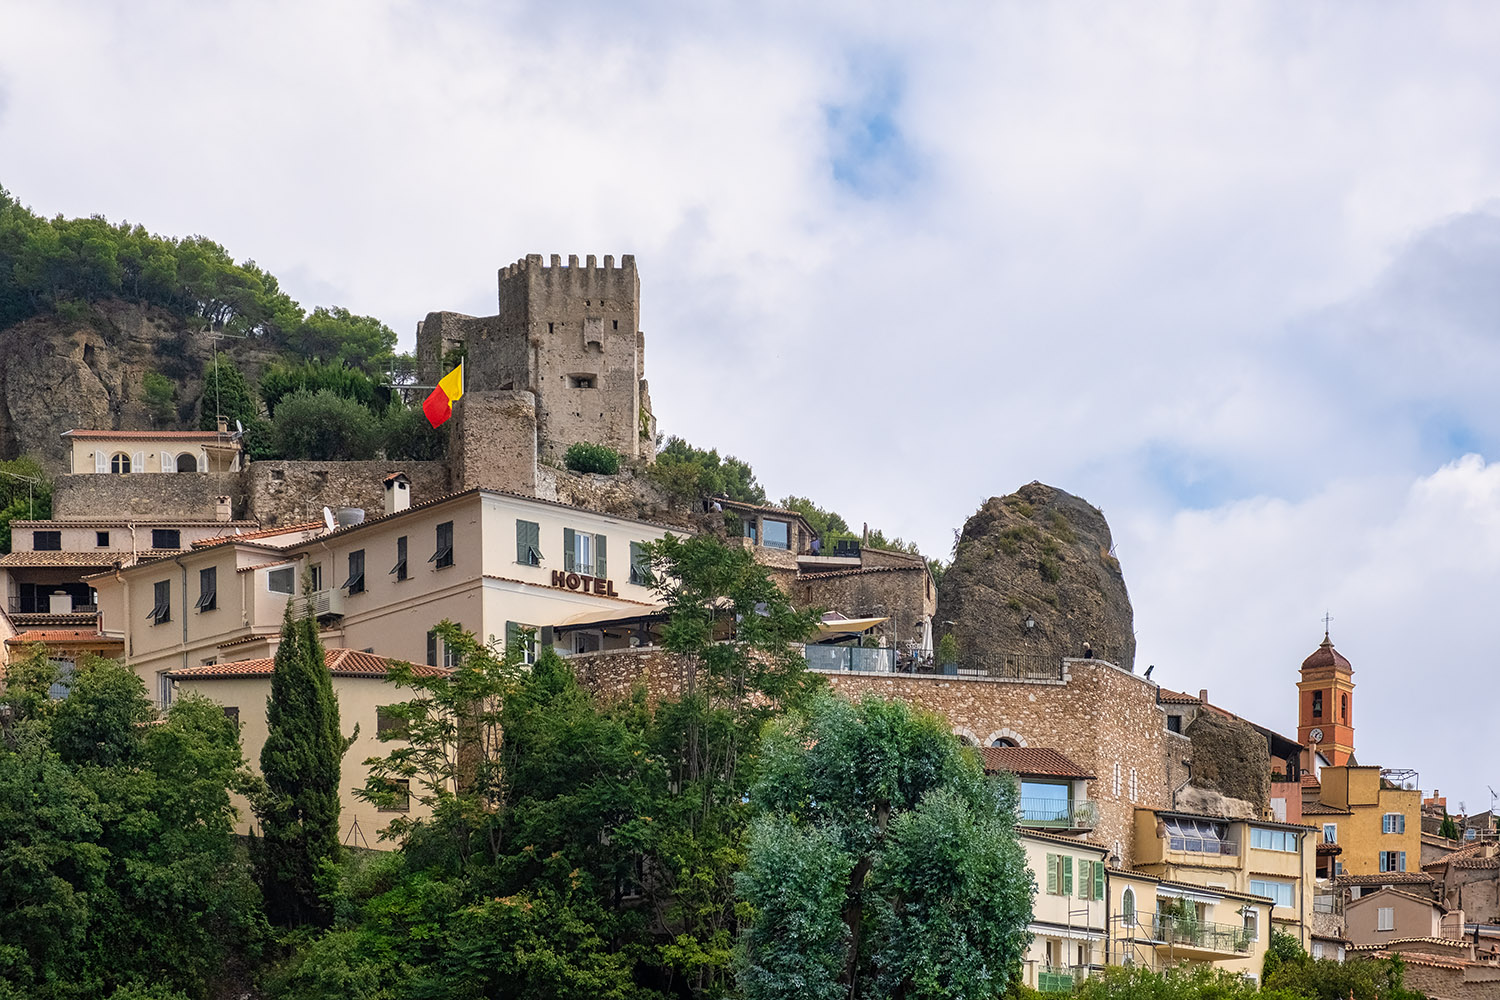 View of the old village of Roquebrune Cap Martin and its 10th Century castle